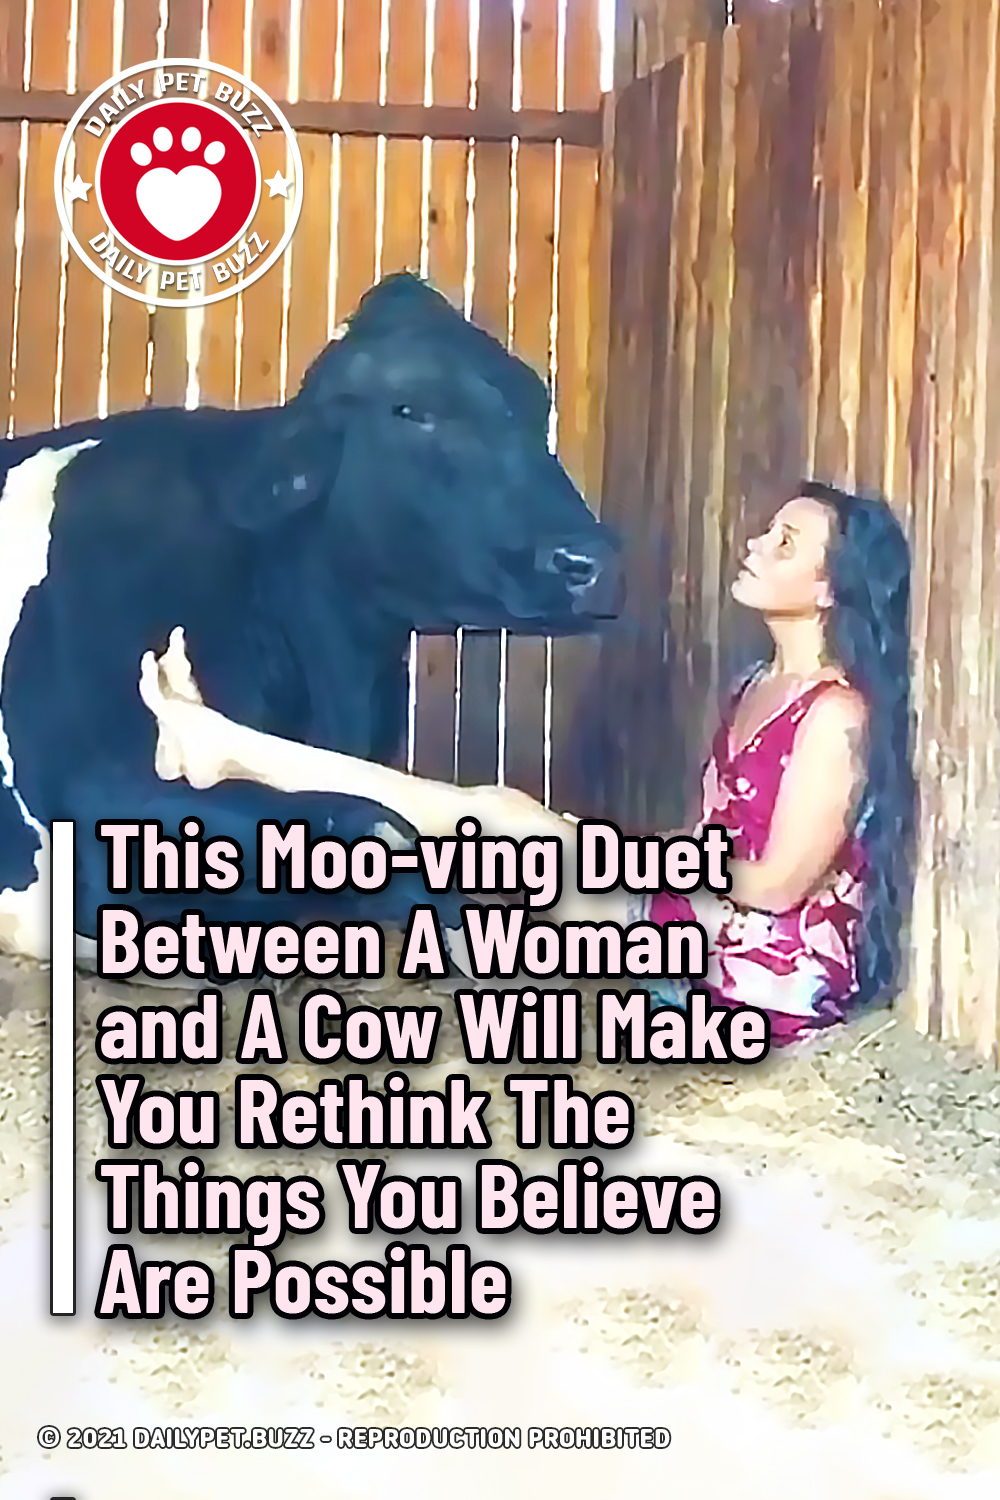 This Moo-ving Duet Between A Woman and A Cow Will Make You Rethink The Things You Believe Are Possible